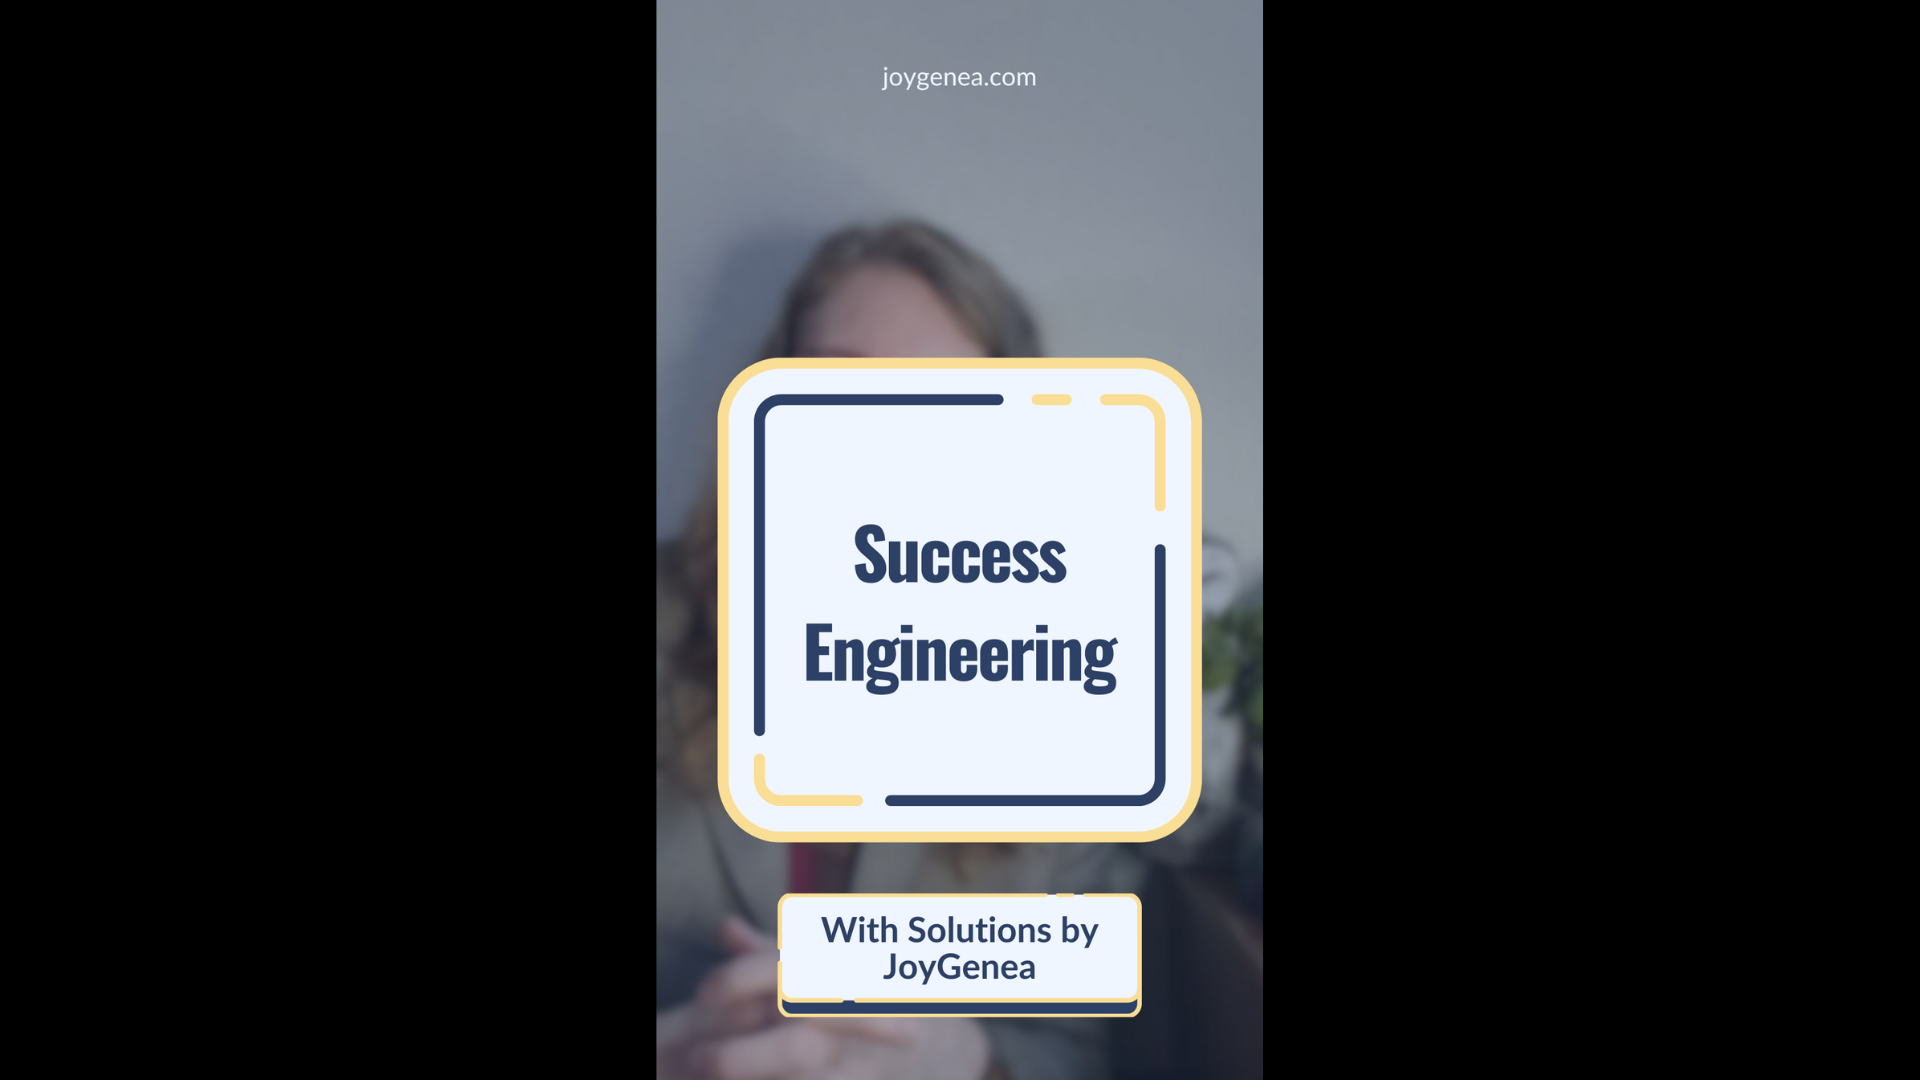 Featured image for “Success Engineering”